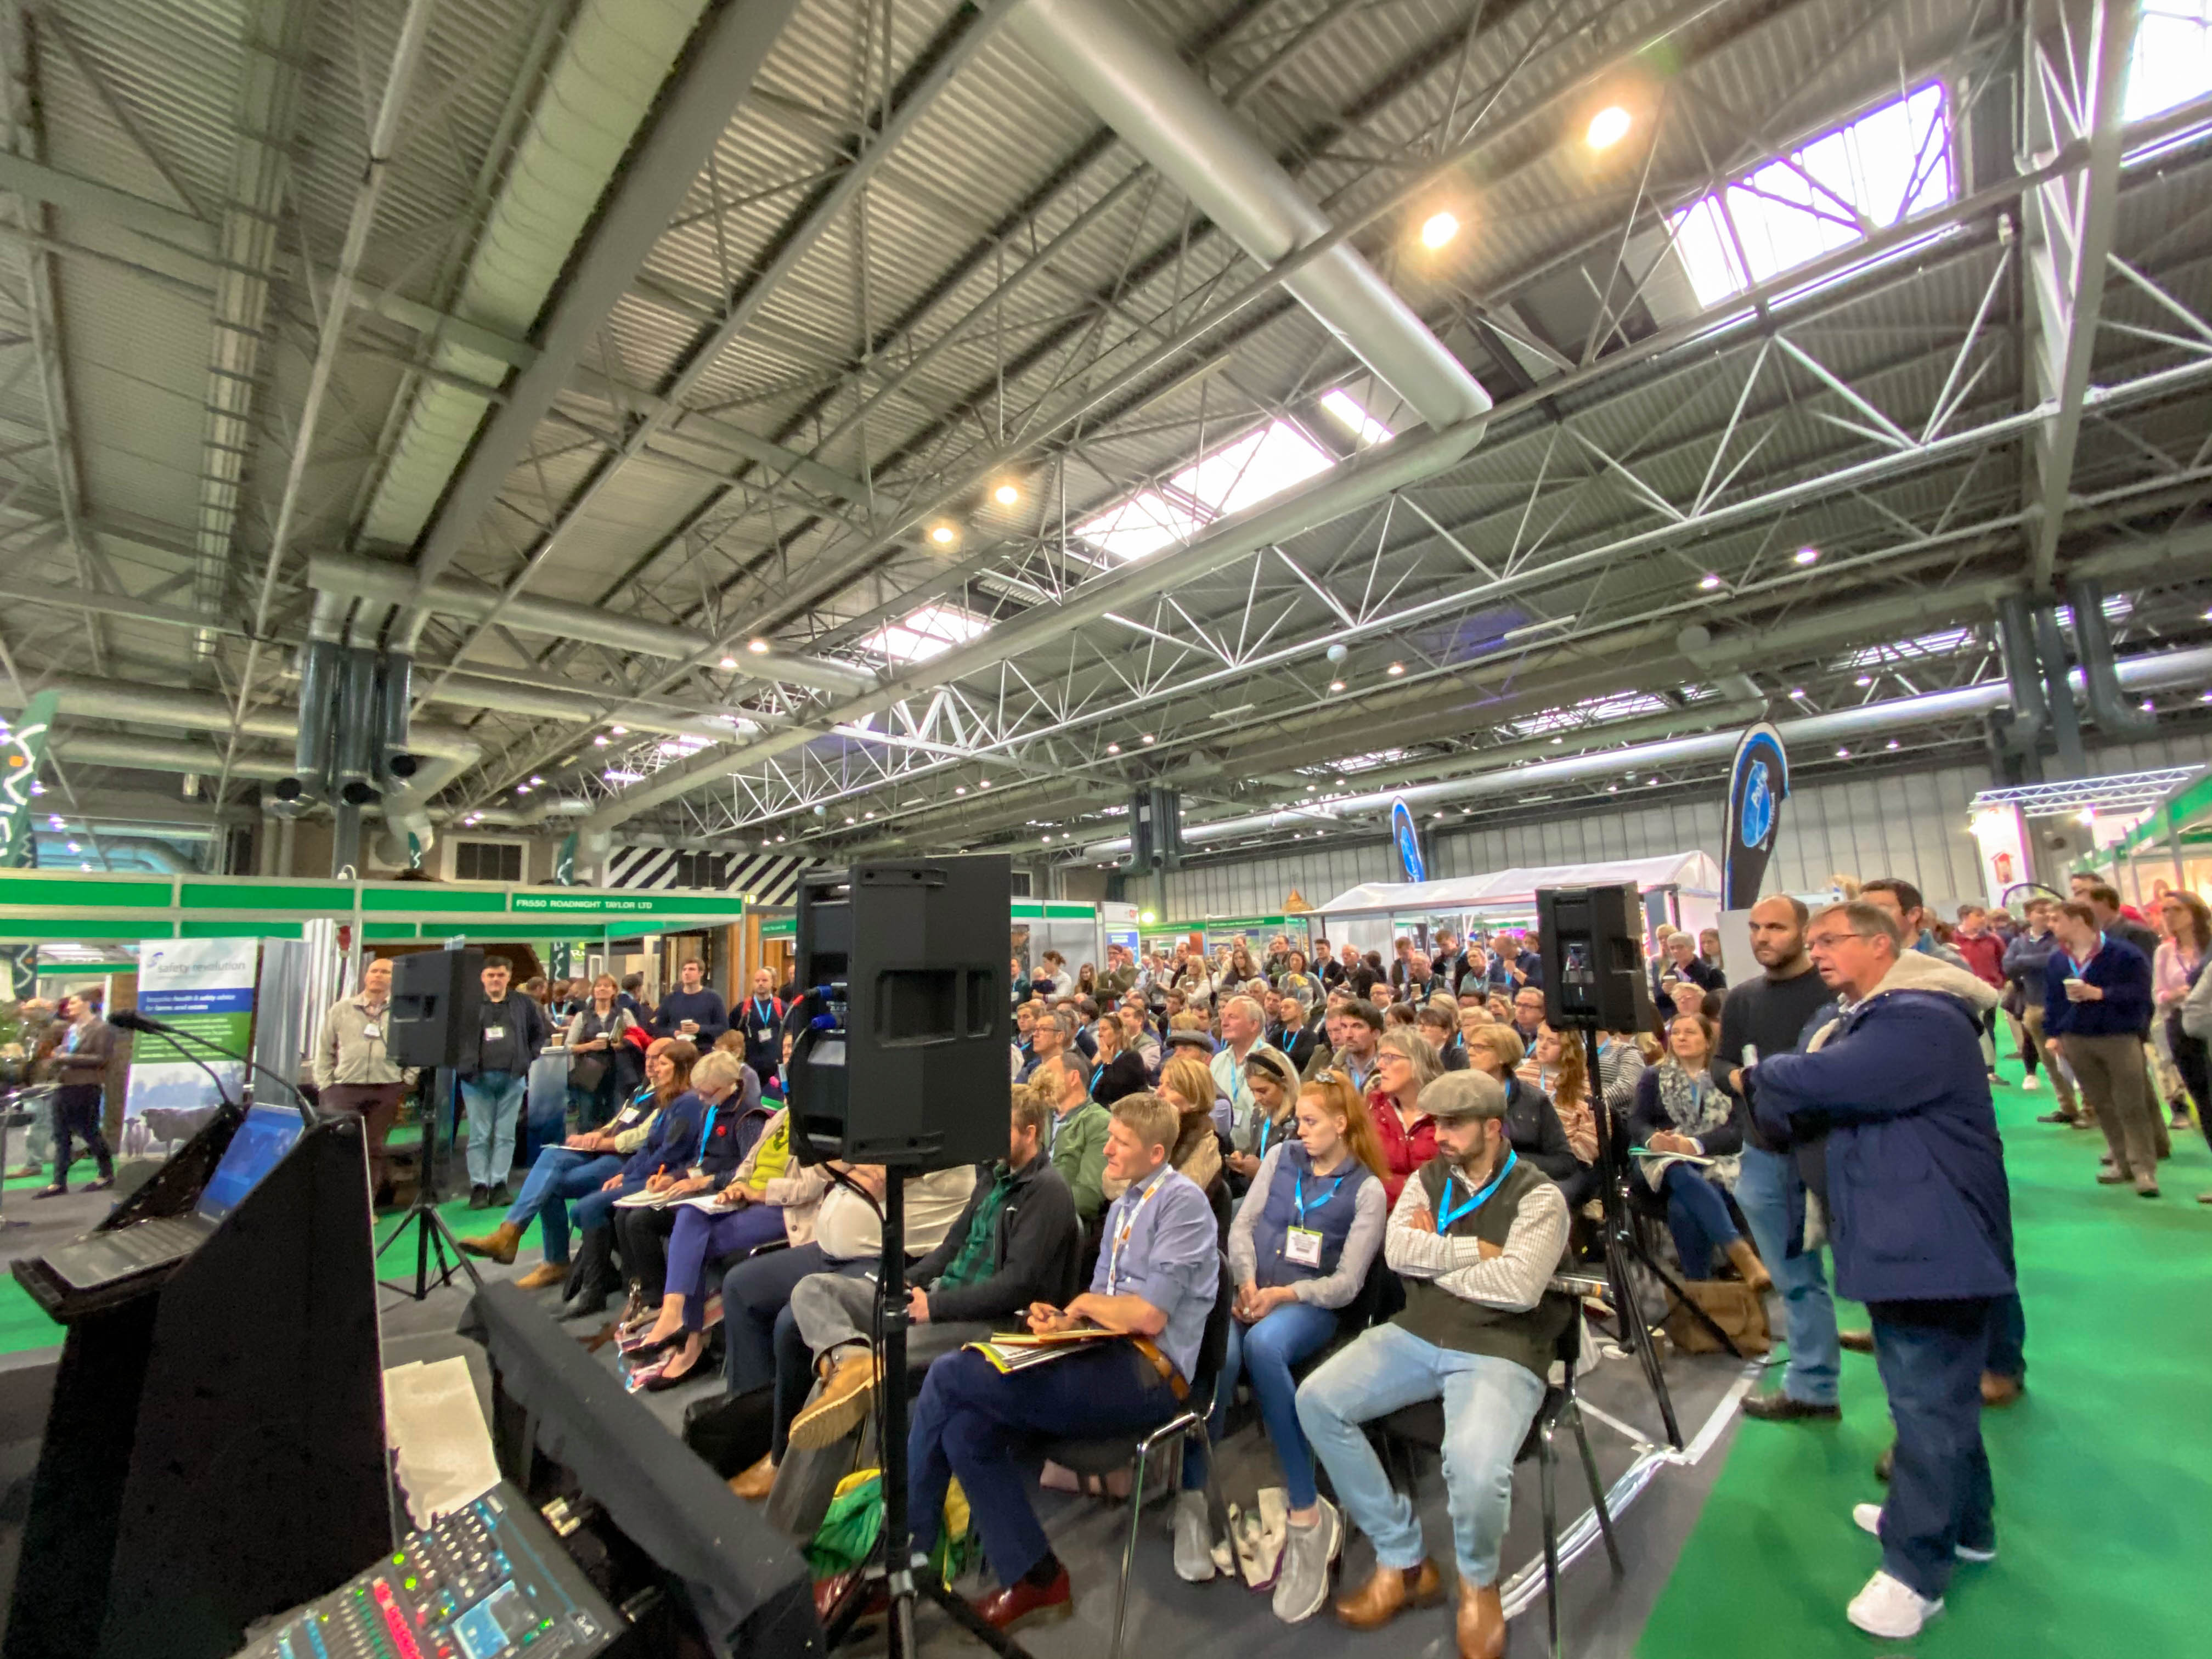 Keynote speakers and masterclasses at Farm Business innovation